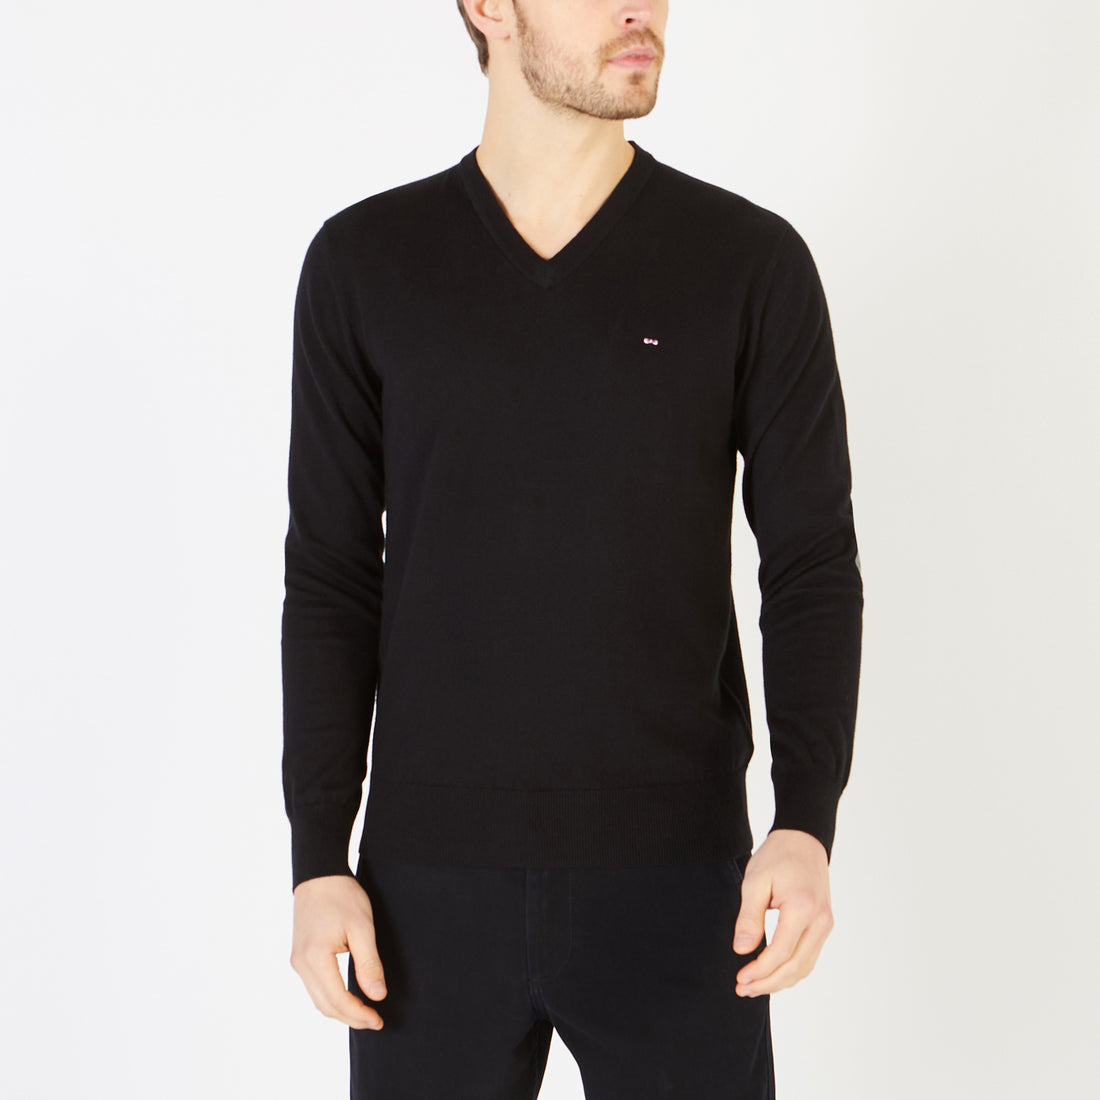 Black Fine Knit Sweater With Elbow Patches